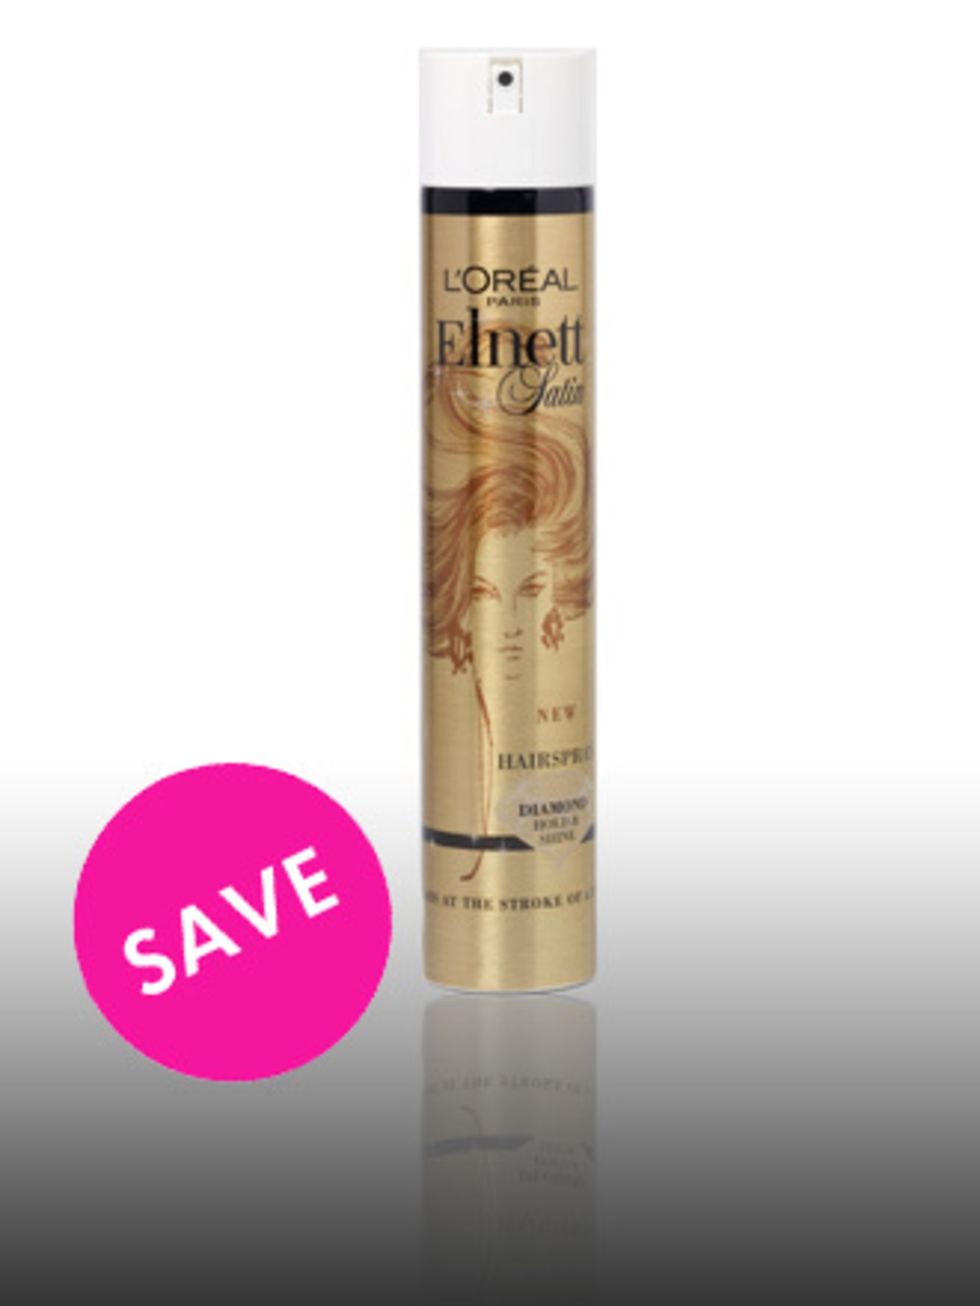 <p>Hairspray, £5.49 by Elnett at <a href="http://www.boots.com/brandtreatment/product_details_brand_treatment.jsp?productid=1005007&amp;classificationid=1040320">Boots</a> </p><p>For a purse- friendly purchase that gives hard-to-beat results, pick up some